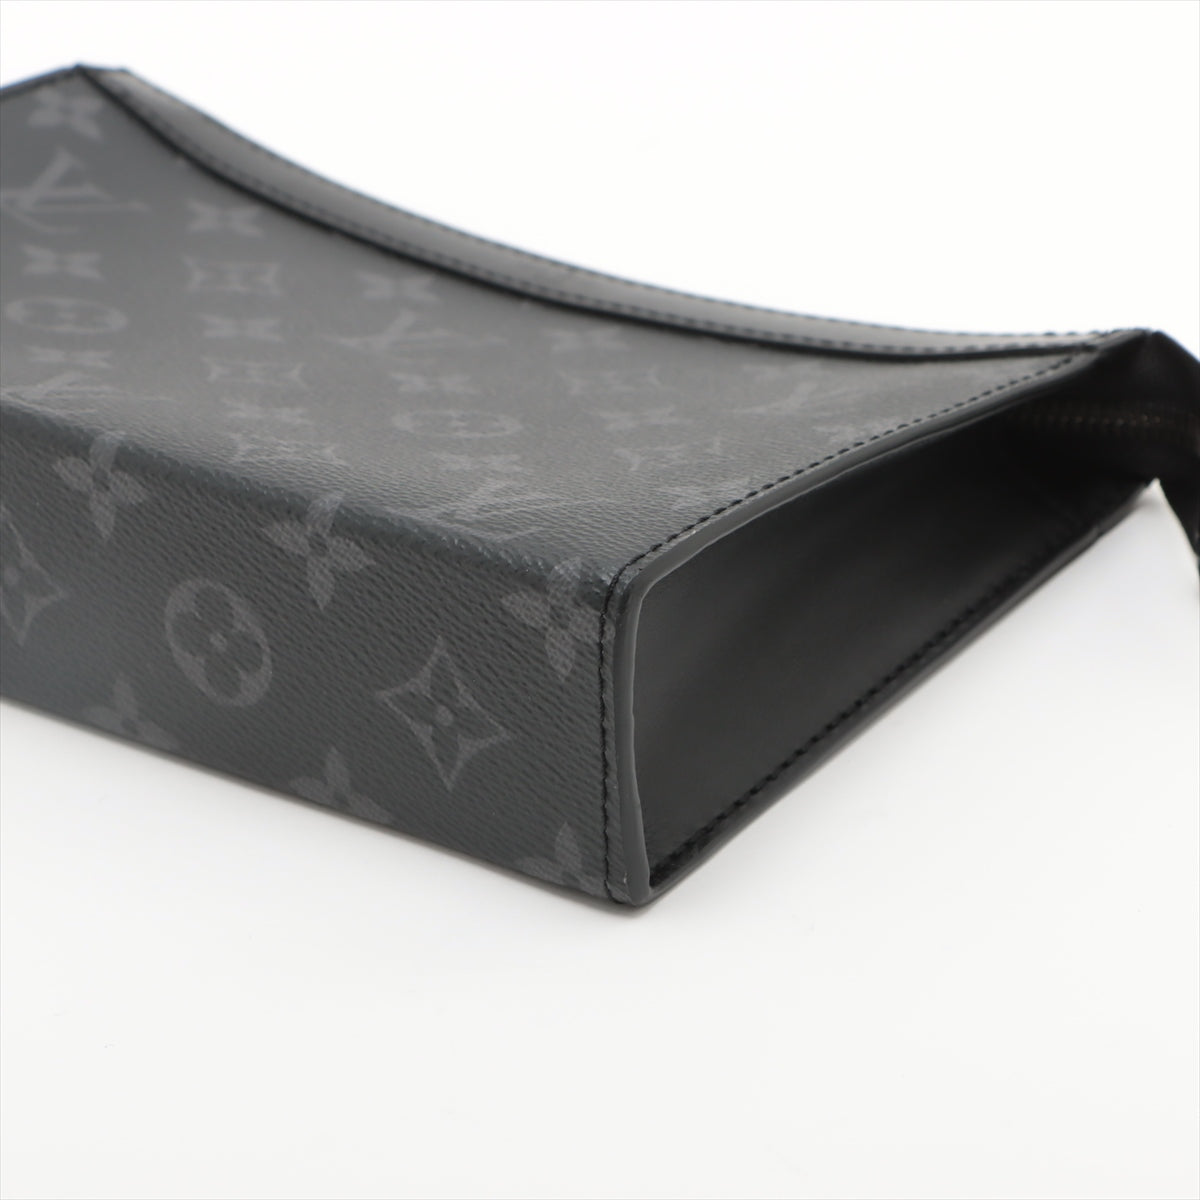 Louis Vuitton Monogram Eclipse Gaston Wearable wallet M81124 There was an RFID response